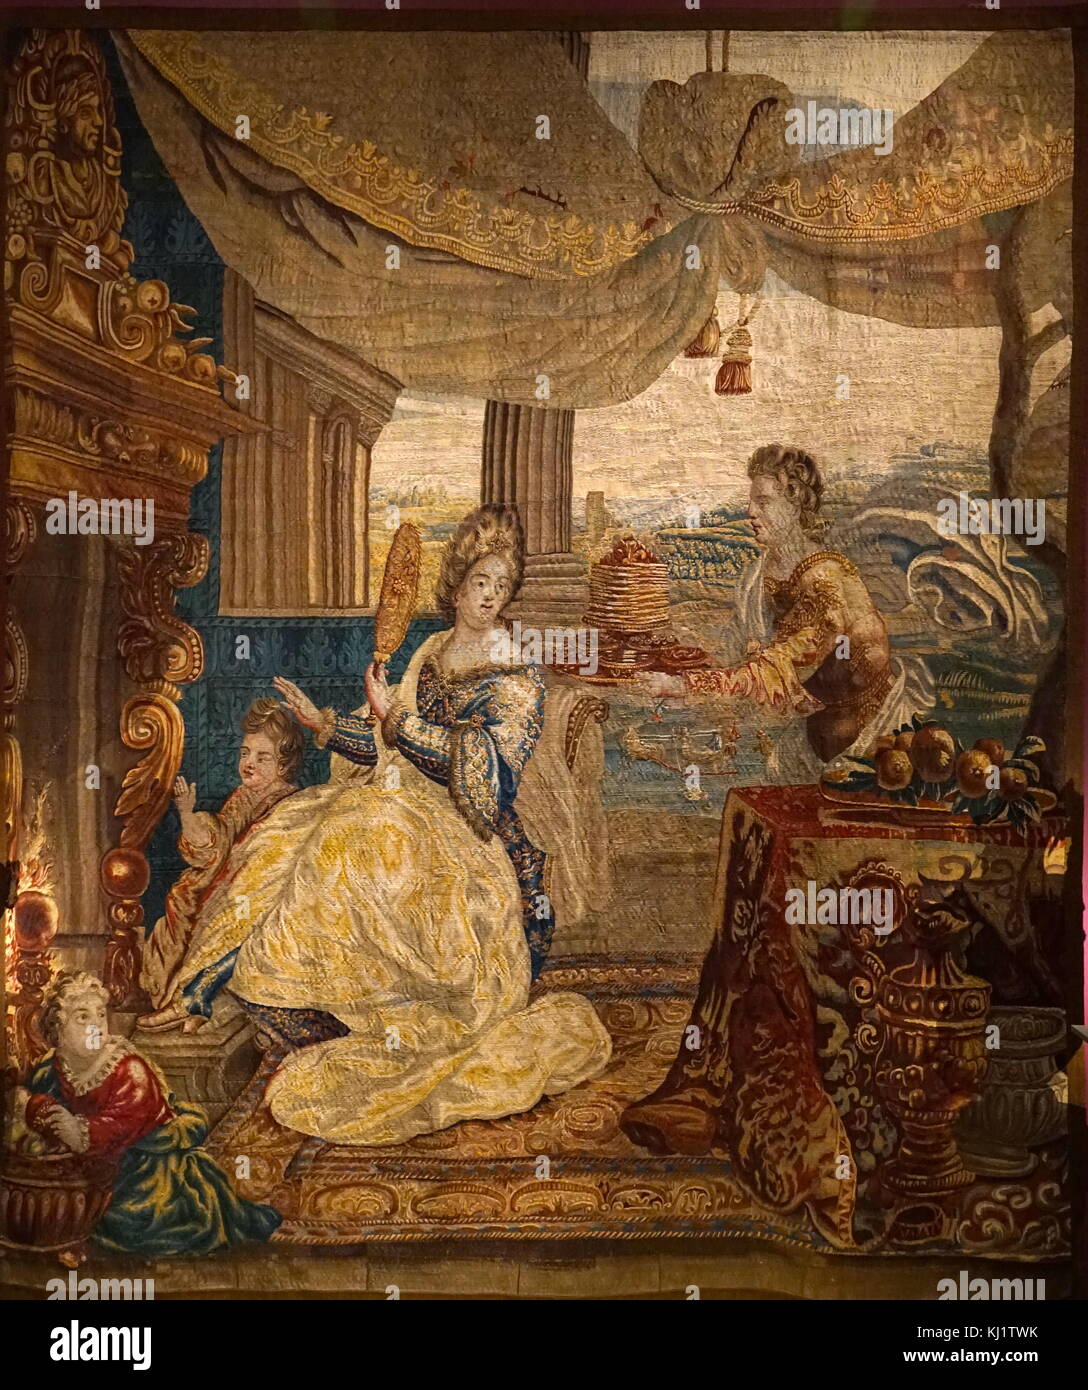 Tapestry titled 'Winter' designed by Lodewijk van Schoor. The tapestry depicts a wealthy woman warming herself by a roaring fire during the winter period. Dated 18th Century Stock Photo